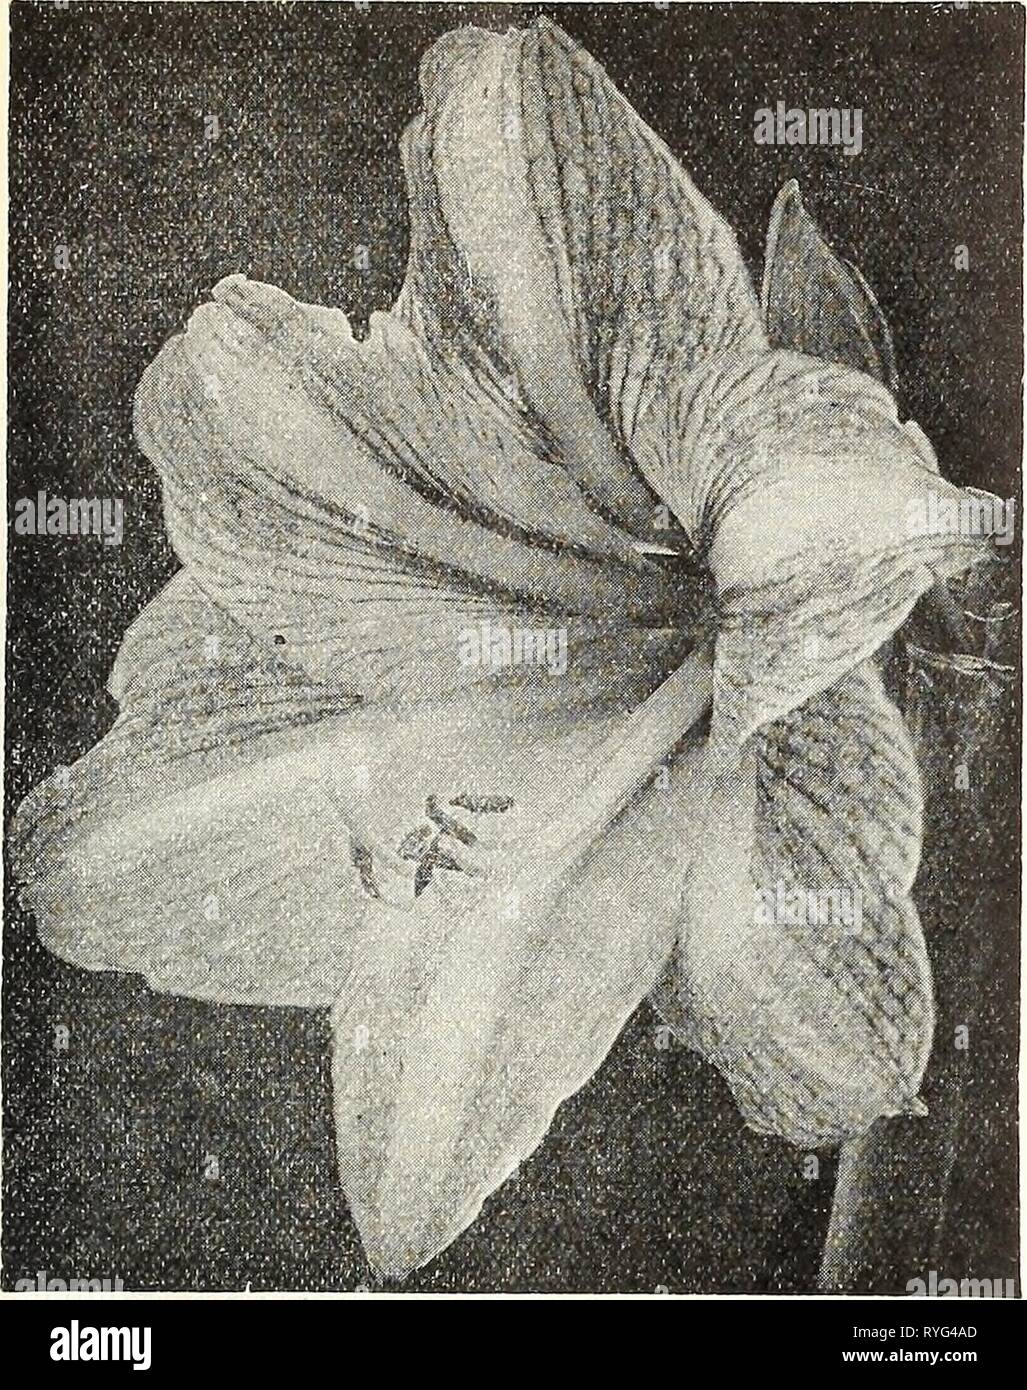 Dreer's wholesale price list  dreerswholesalep1930henr 2 Year: 1930  HENRY A. DREER Bulbs and Tubers WHOLESALE LIST    Dreer's Giant American Hybrid Amaryllis Achimenes A plant closely allied to the Gloxinia and which will succeed best under similar cultivation. Achimenes are supplied in small corms or rhizomes, and for best effect three or more should be planted in a pot. They continue in flower for a period of from 8 to 10 weeks. We offer six distinct varieties with flowers averaging IV4, inches in diameter. Anibroise Verschaffelt. Blush white with delicate tracings of pale purple. Galatea.  Stock Photo